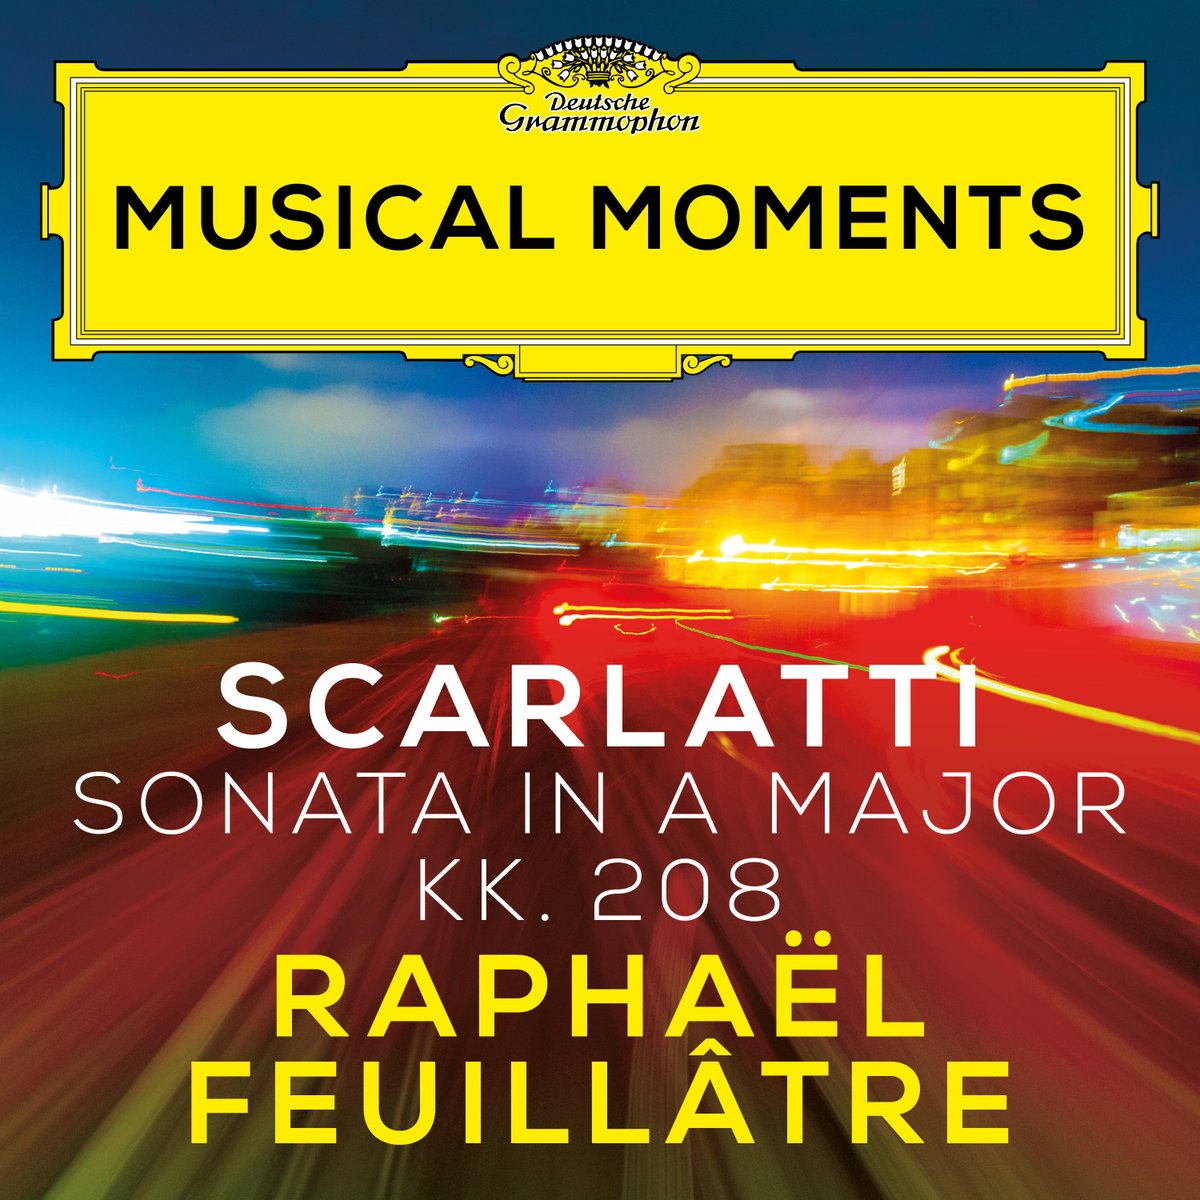 A new Musical Moment is out! 🎧 → dg.lnk.to/MusicalMoments Raphaël Feuillâtre skilfully plays with the sonata’s rhythms and phrasing, bringing out the full expressive potential of Scarlatti’s beautiful melodies.